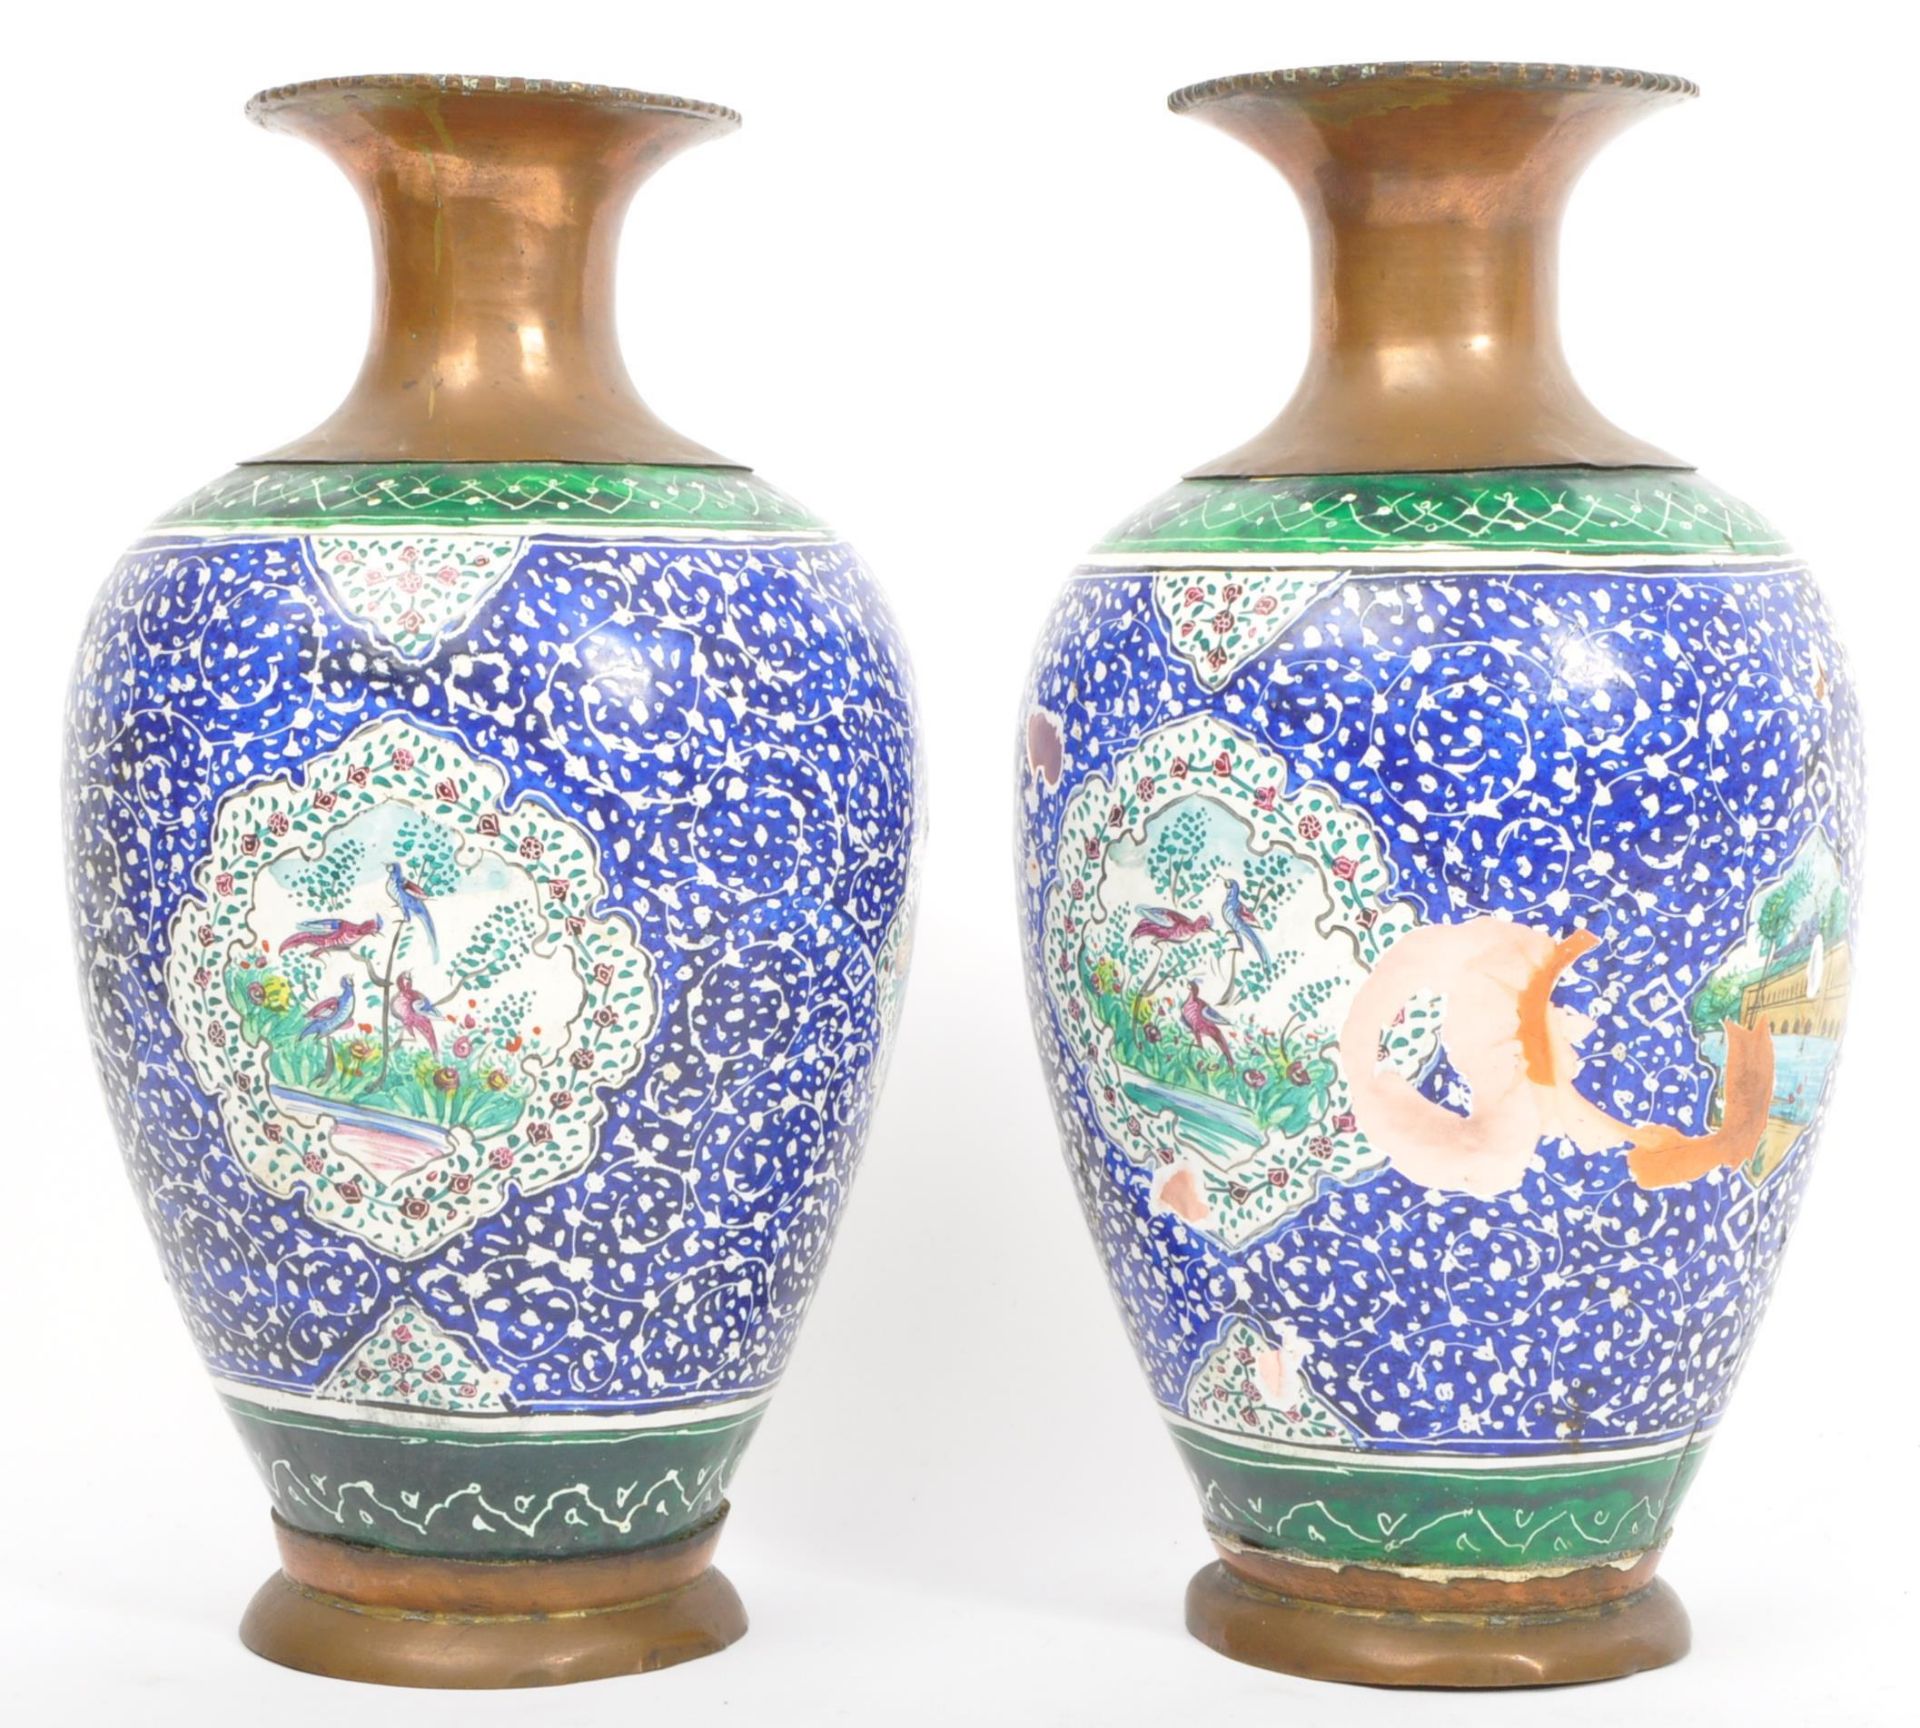 PAIR OF EARLY 20TH CENTURY COPPER & ENAMEL HAND PAINTED VASES - Image 3 of 5